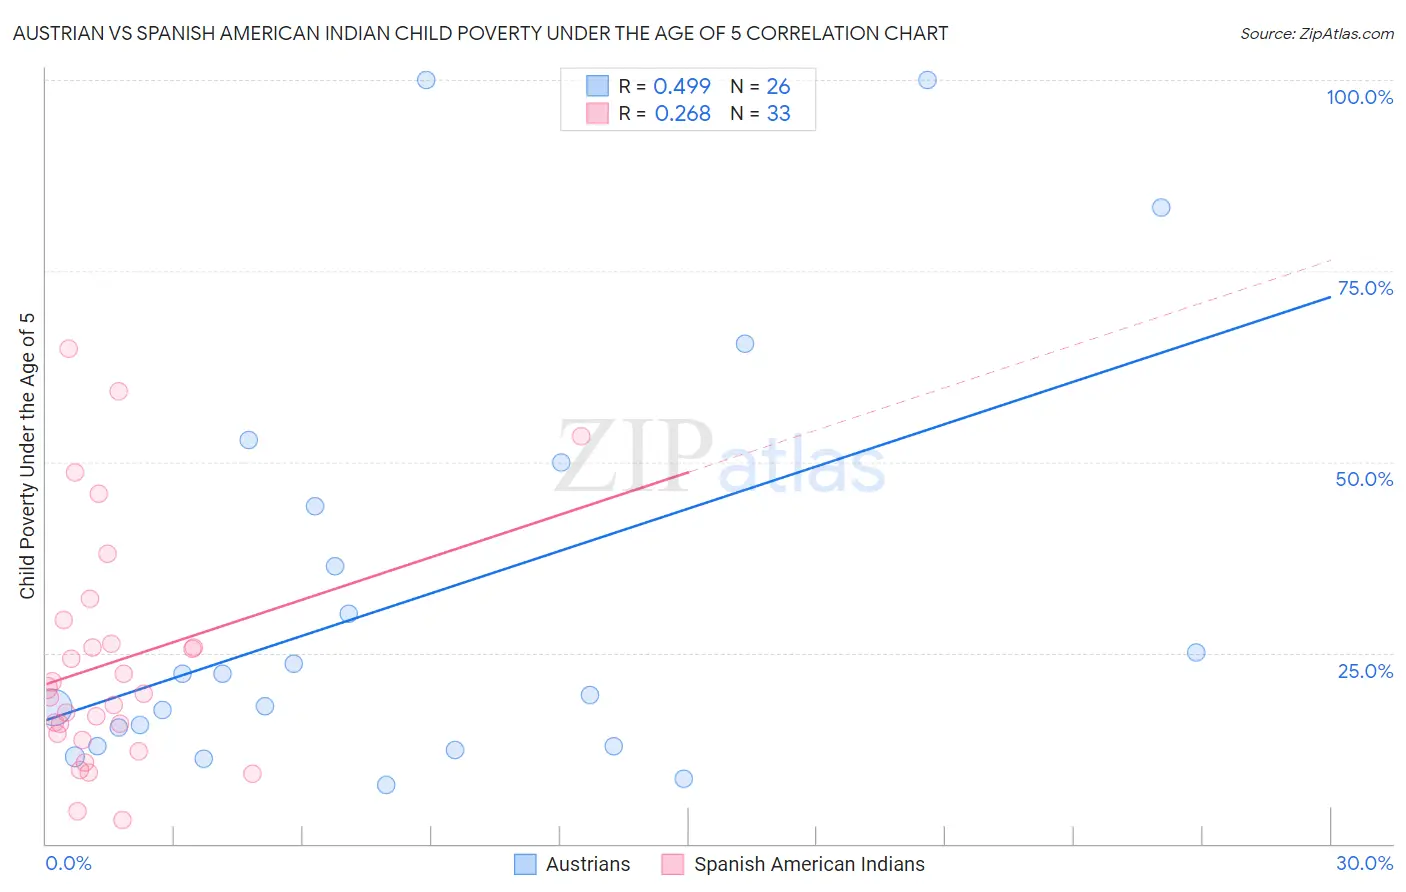 Austrian vs Spanish American Indian Child Poverty Under the Age of 5